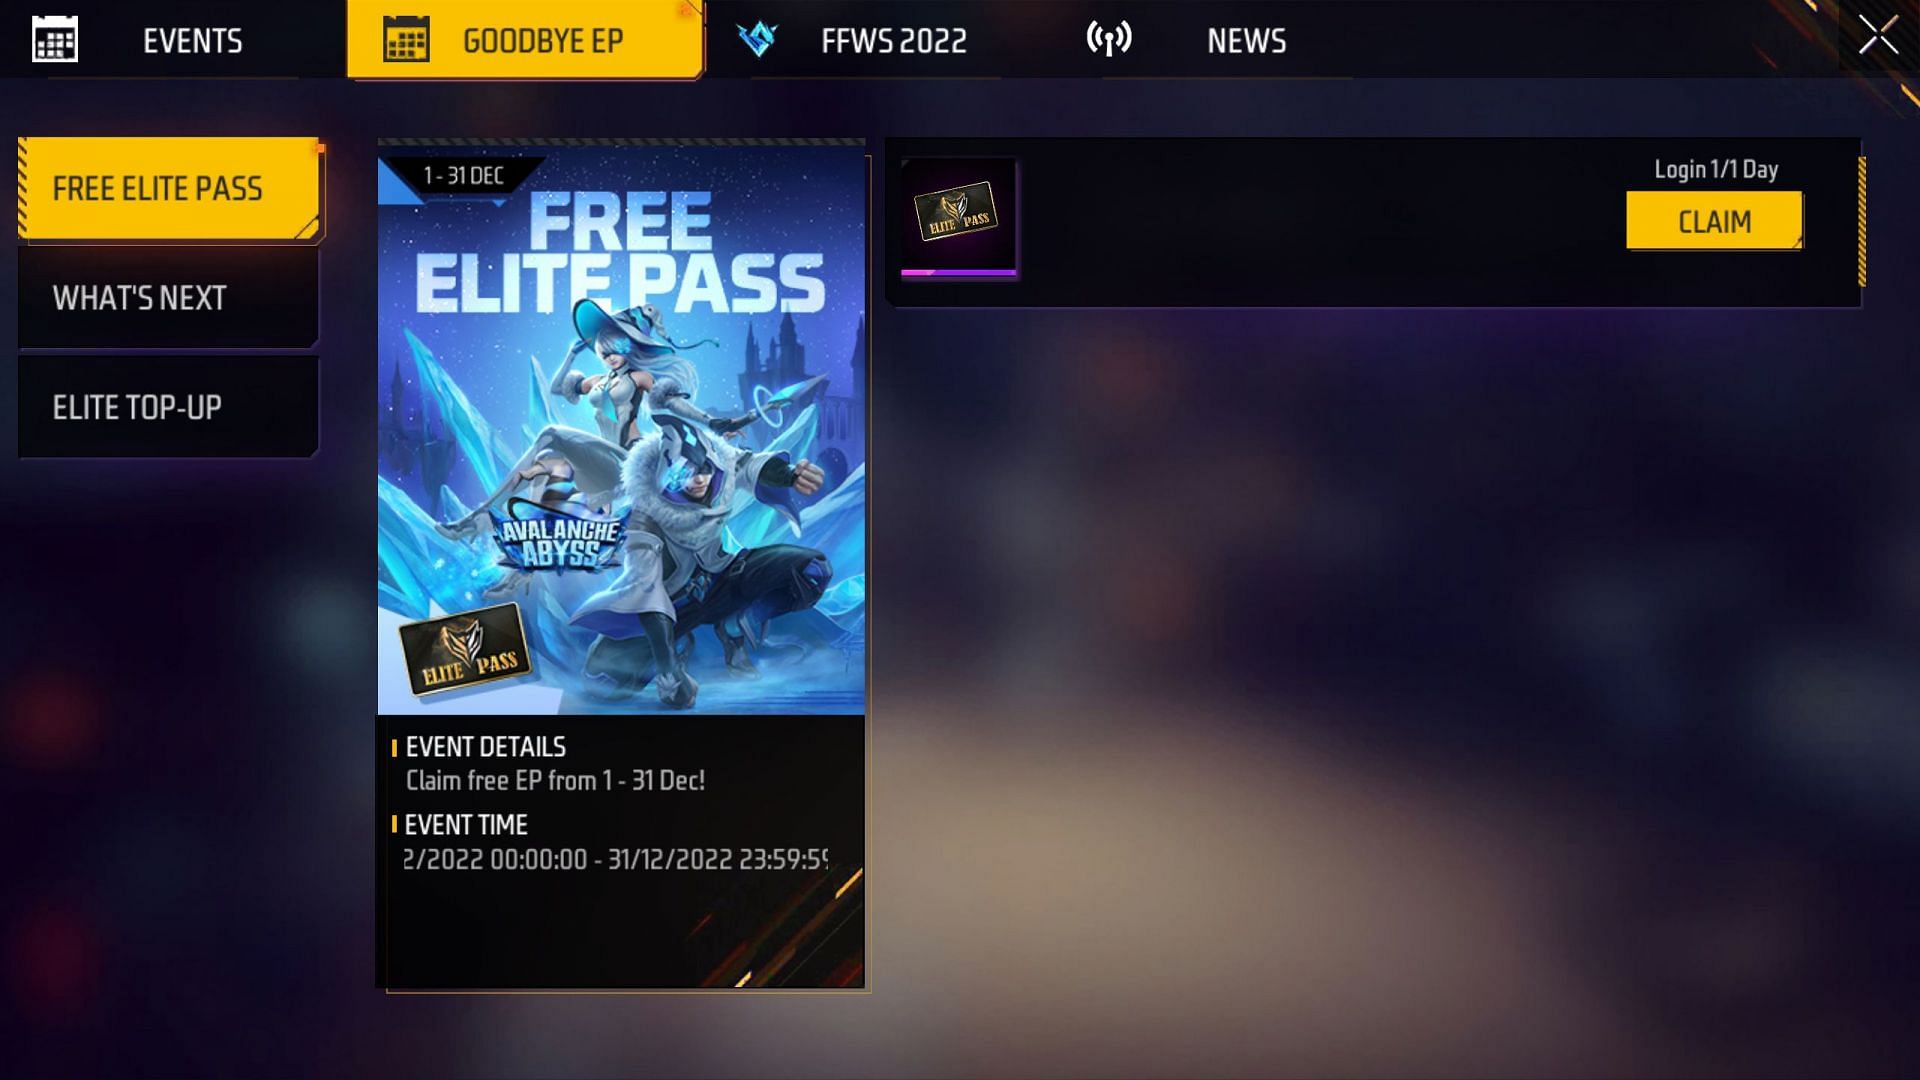 LEAKED! ELITE PASS JANUARY 2023 COMPLETE!! AND EVERYTHING FROM GALÁCTICA  LIBRARY - FREE FIRE NEWS 